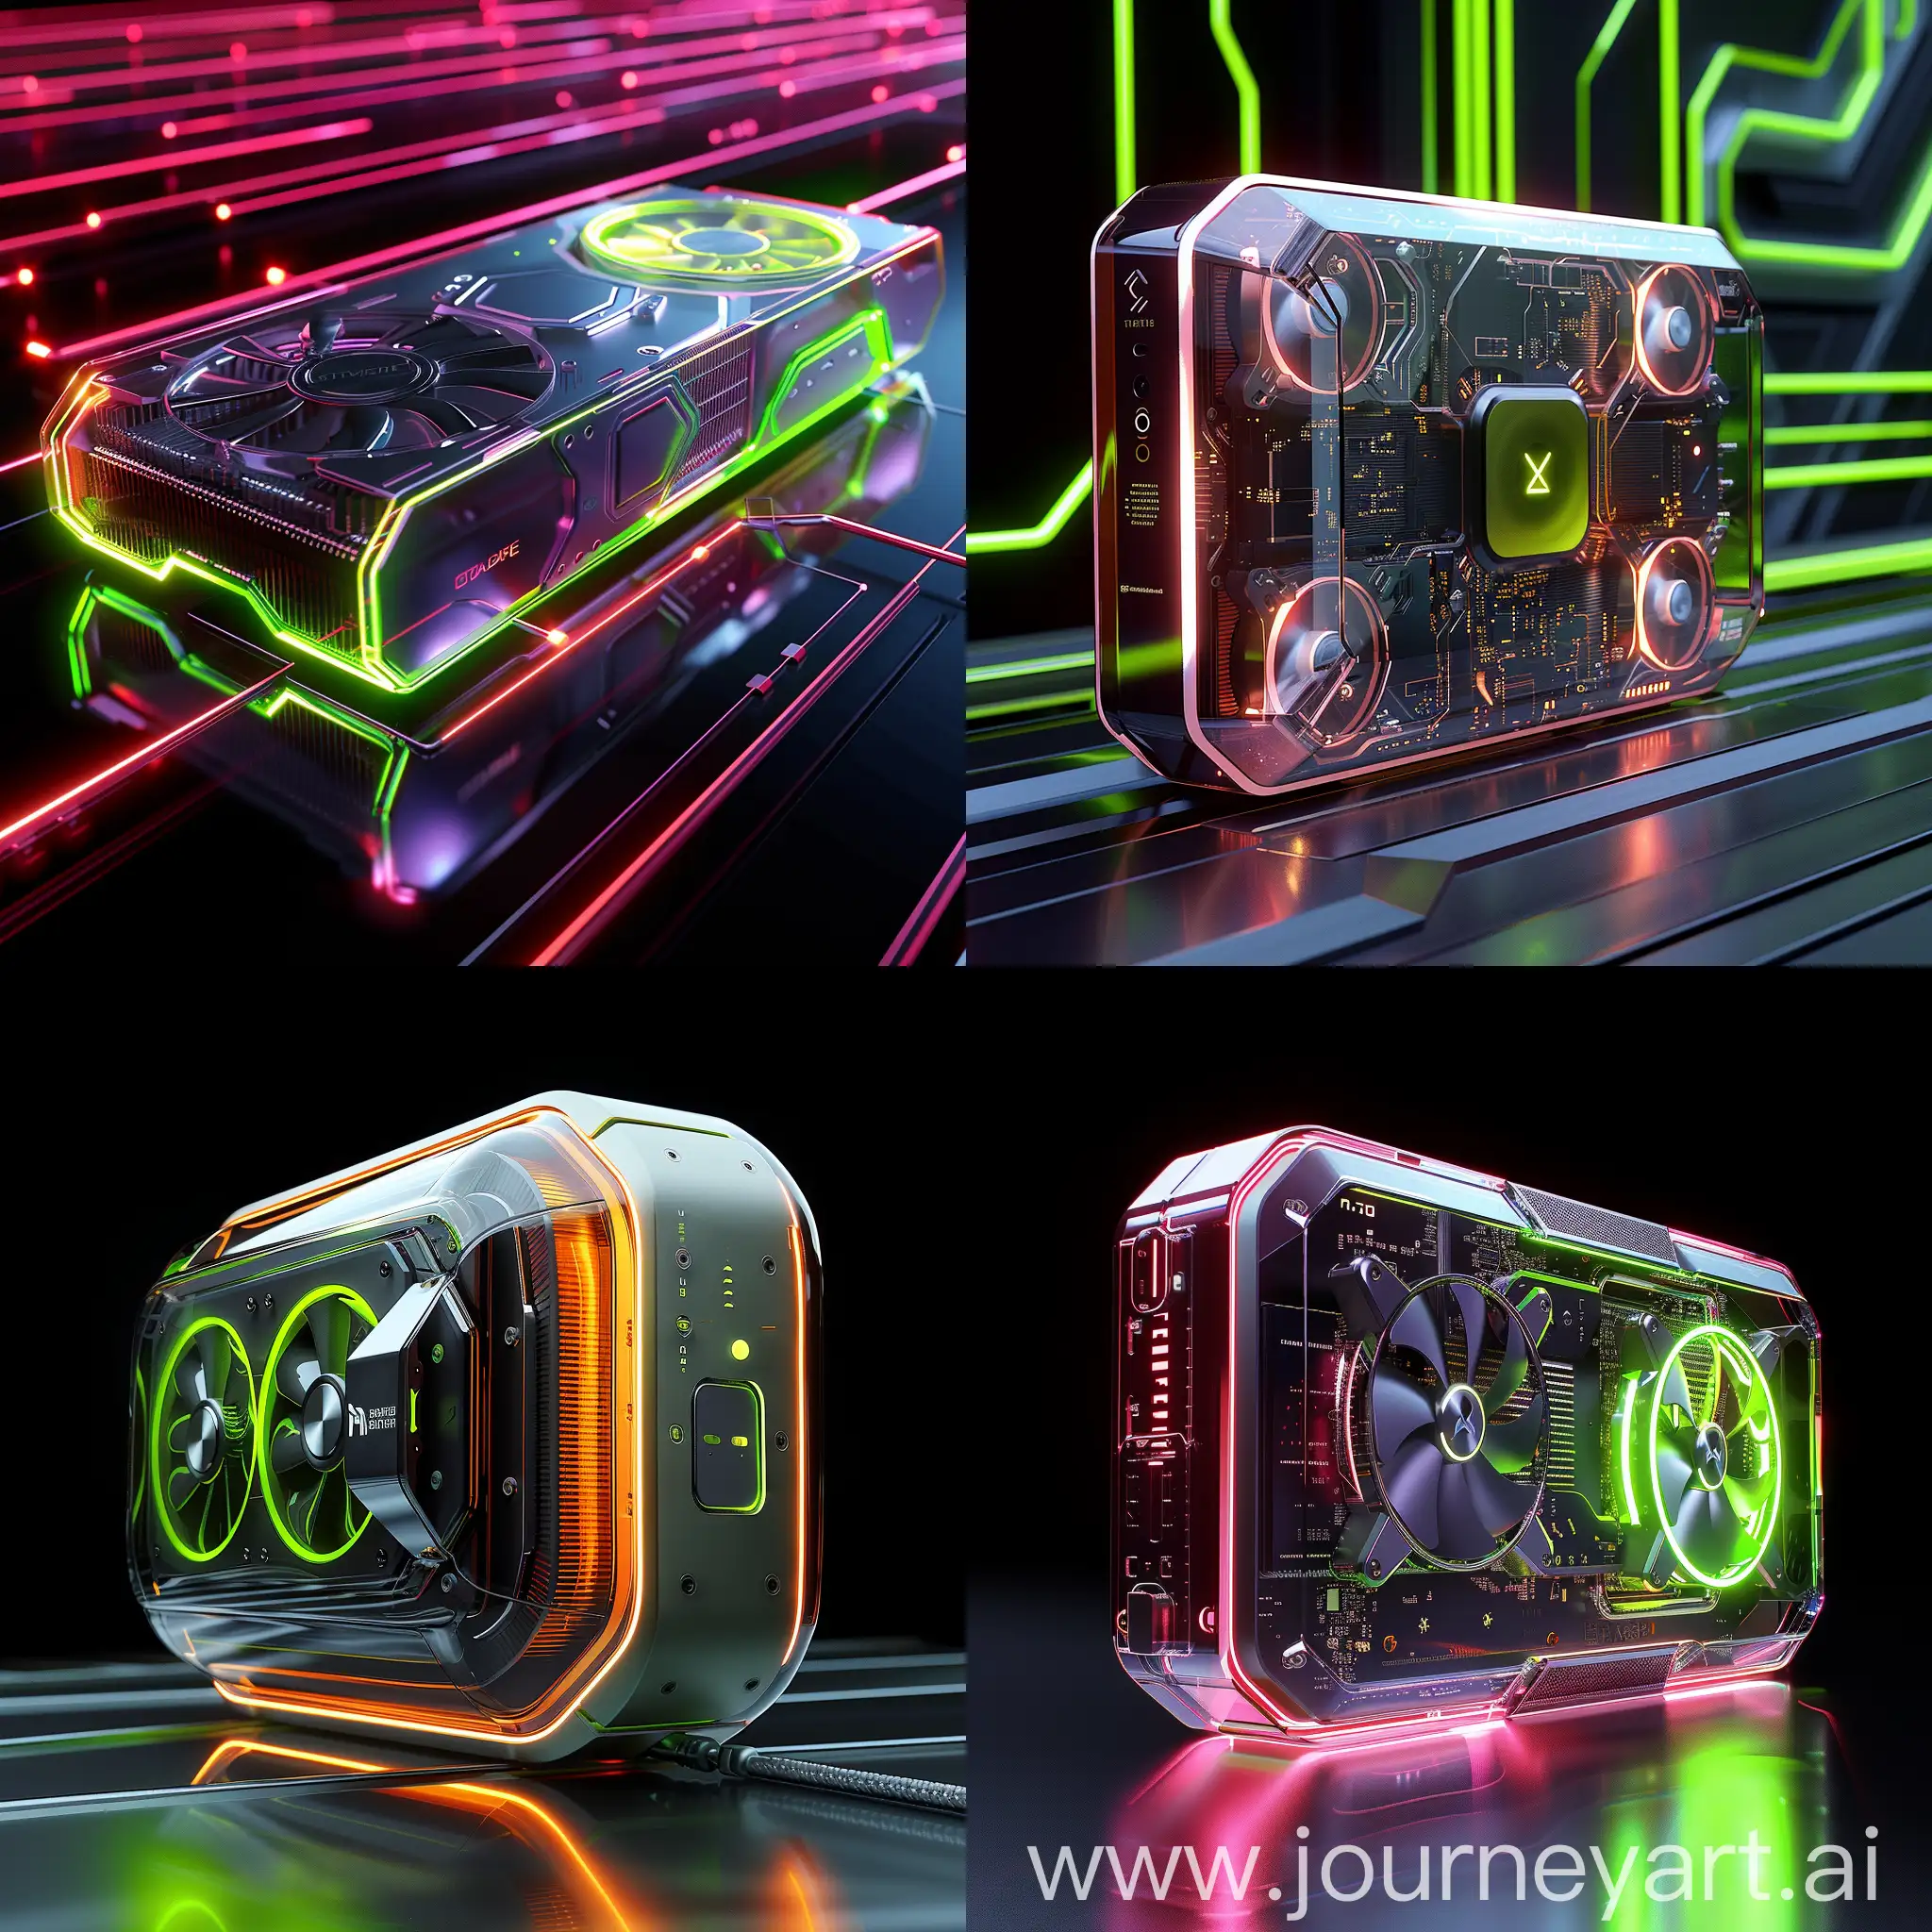 Futuristic RTX 4090 https://www.nvidia.com/content/dam/en-zz/Solutions/geforce/ada/rtx-4090/geforce-ada-4090-web-og-1200x630.jpg, Energy-Efficient Design, Recyclable Materials, Low Emission Manufacturing, Sustainable Packaging, Renewable Energy Support, Efficient Cooling System, Low Power Standby Mode, Eco-Friendly Certification, Longevity, Carbon Footprint Reduction, Quantum Processing, Neural Networking AI, Augmented Reality Support, 5G Connectivity, Holographic Display, Biometric Security, Wireless Charging, Quantum Encryption, Quantum Teleportation Interface, Virtual Reality Integration, Sleek Minimalist Aesthetics, Transparent Casing, Dynamic LED Lighting, Modular Design, Floating Display, Nano Texture Coating, Invisible Ports, Aerodynamic Shape, 3D Printing Compatibility, Holographic Projection, Iridescent Finish, Chameleon Paint, Tricolor Gradient, Bioluminescent Glow, Liquid Metal Chrome, Aurora Borealis Effect, Electrochromic Panels, UV Reactive Pigments, Prismatic Crystal Coating, Nanotech Color Shifting, octane render --stylize 1000